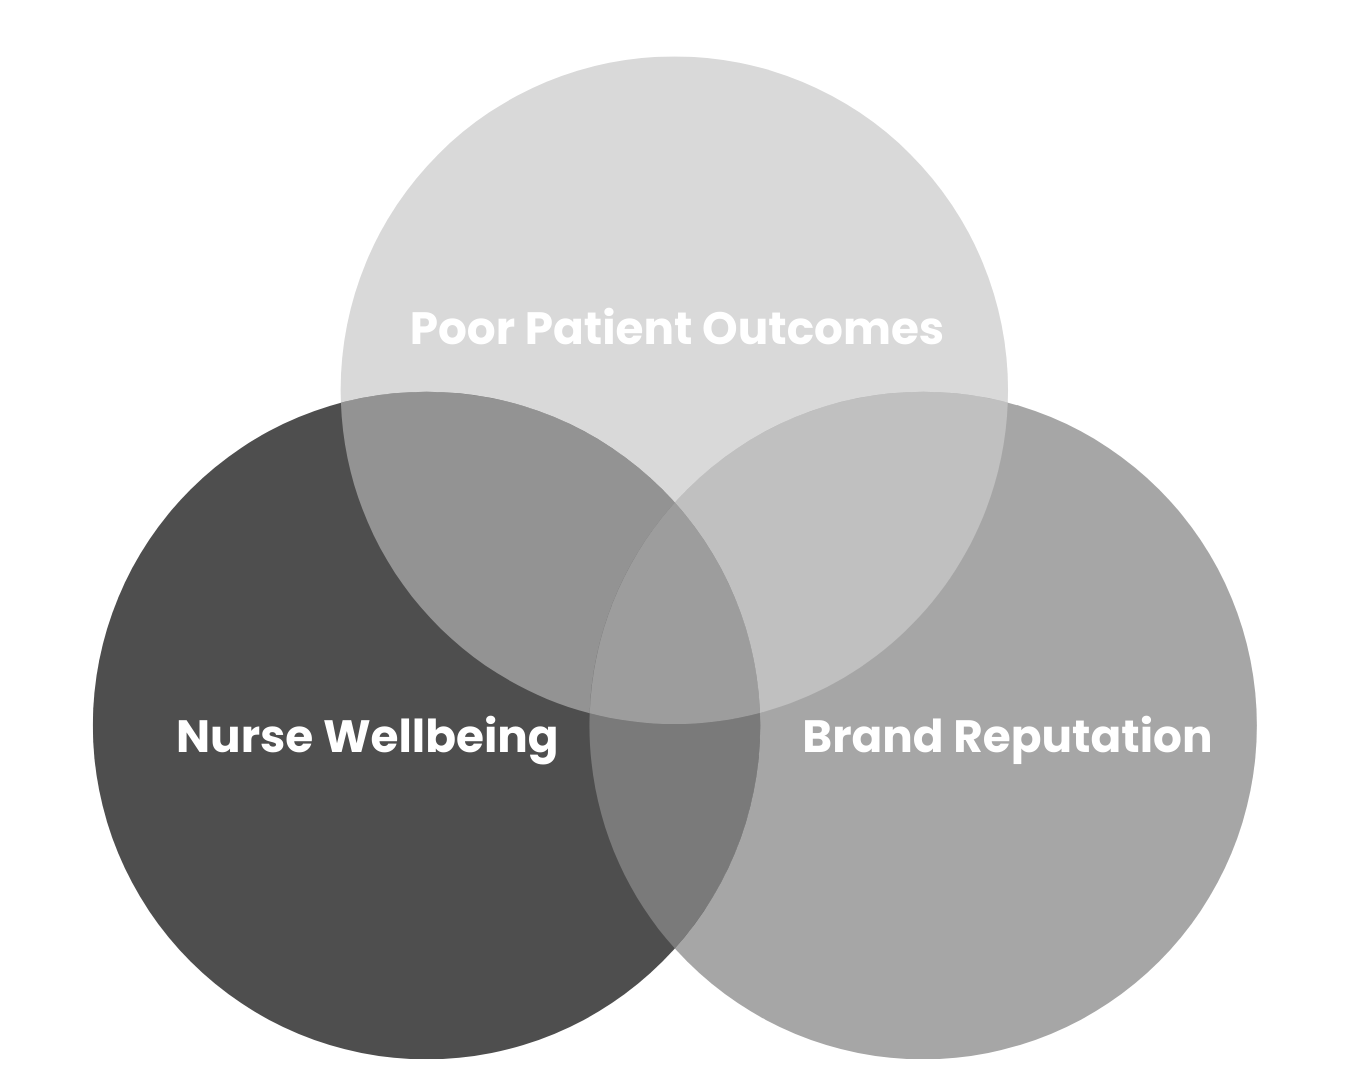 Understaffing affects nurses, patients, and brand reputation